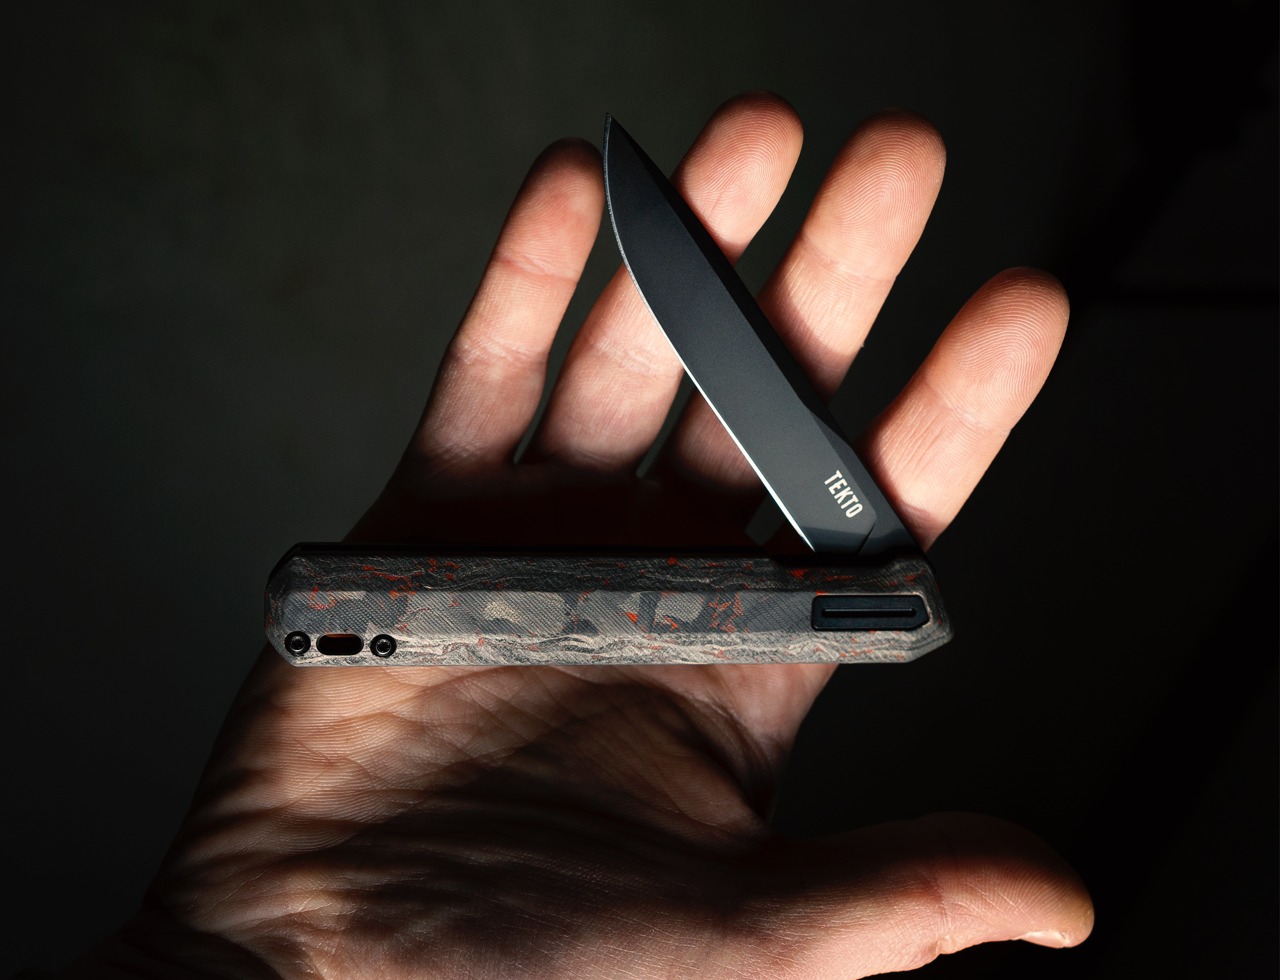 This handsome EDC knife unfolds smoothly and rapidly to serve your needs in an instant